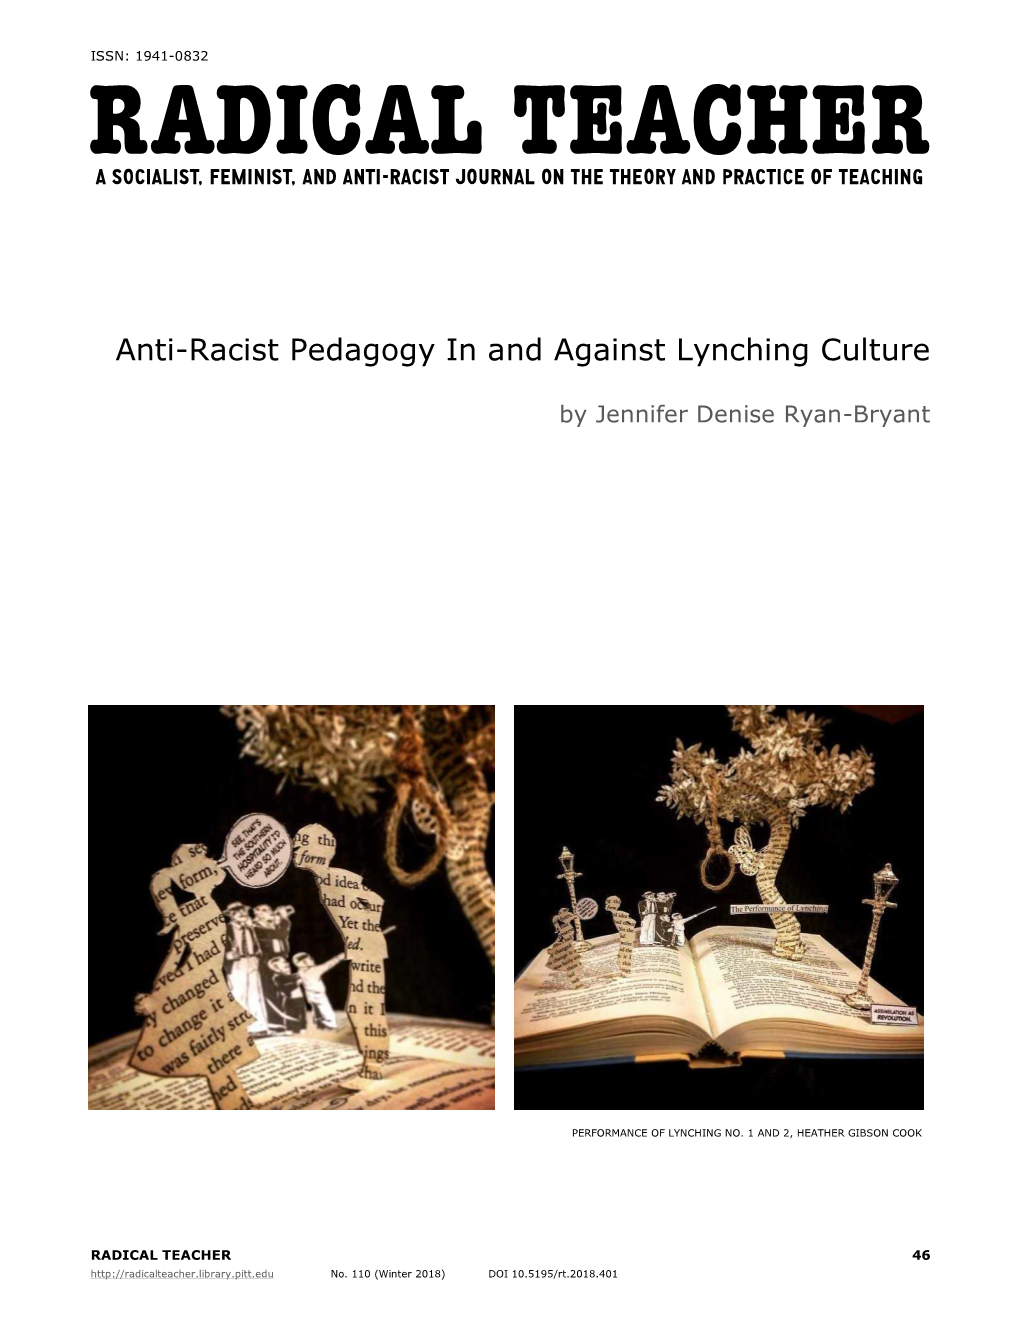 Anti-Racist Pedagogy in and Against Lynching Culture